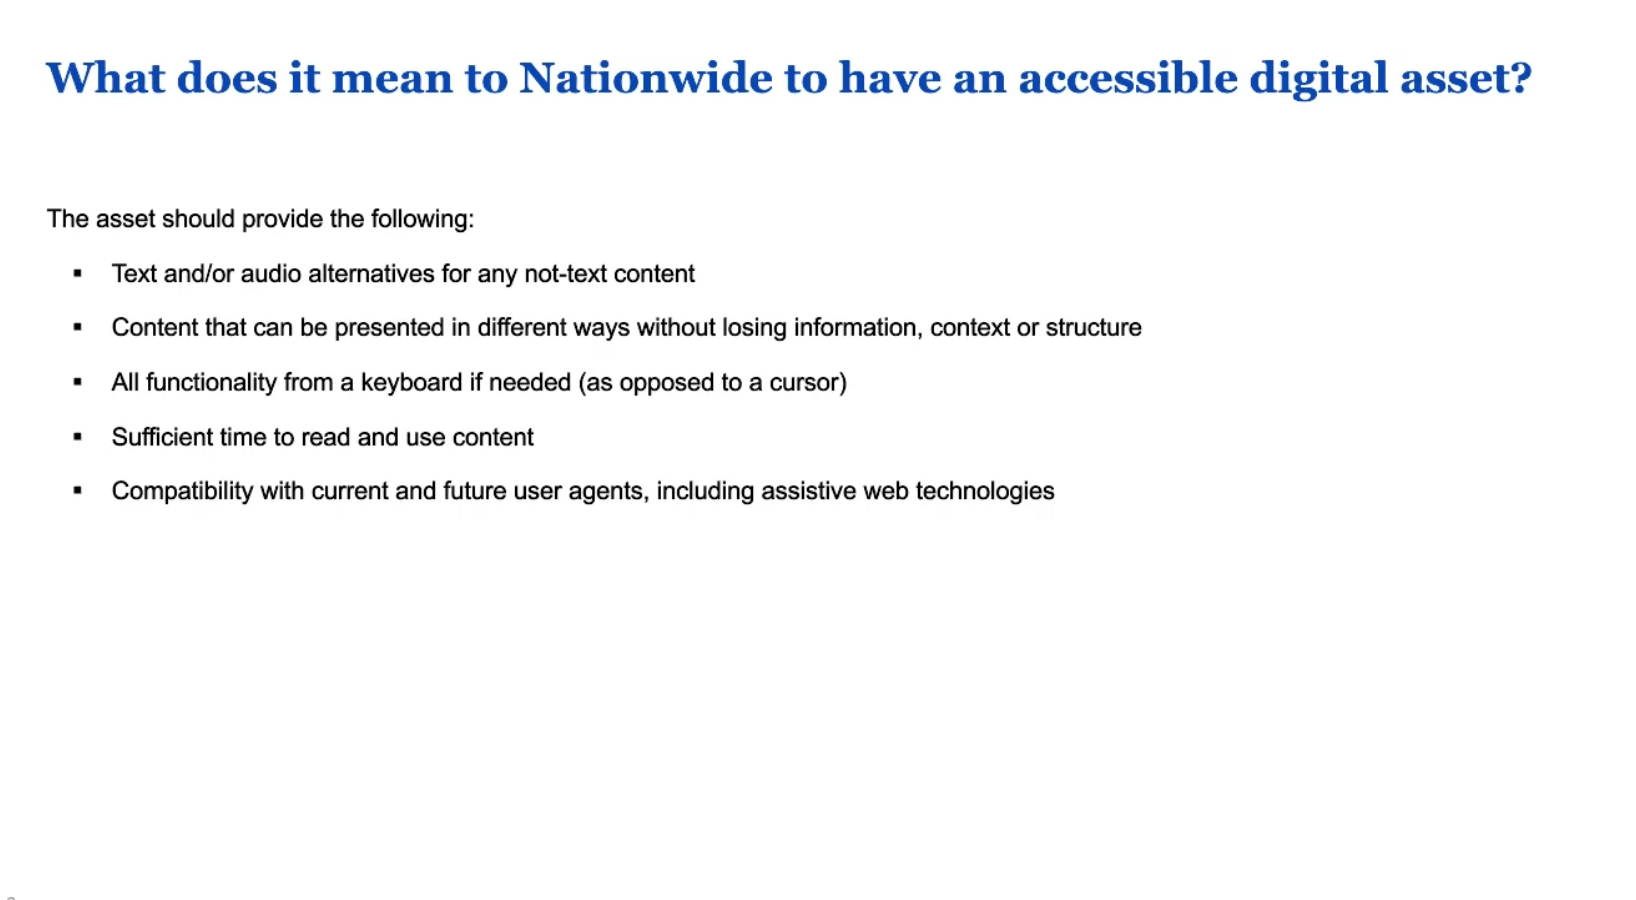 What does it mean to Nationwide to have an accessible digital asset? The asset should provide : text and /or audio alternatives for non-text content, present content in different ways without losing information, all functionality for keyboard, sufficient time to read and use content, and compatibility with current and future user agents.  